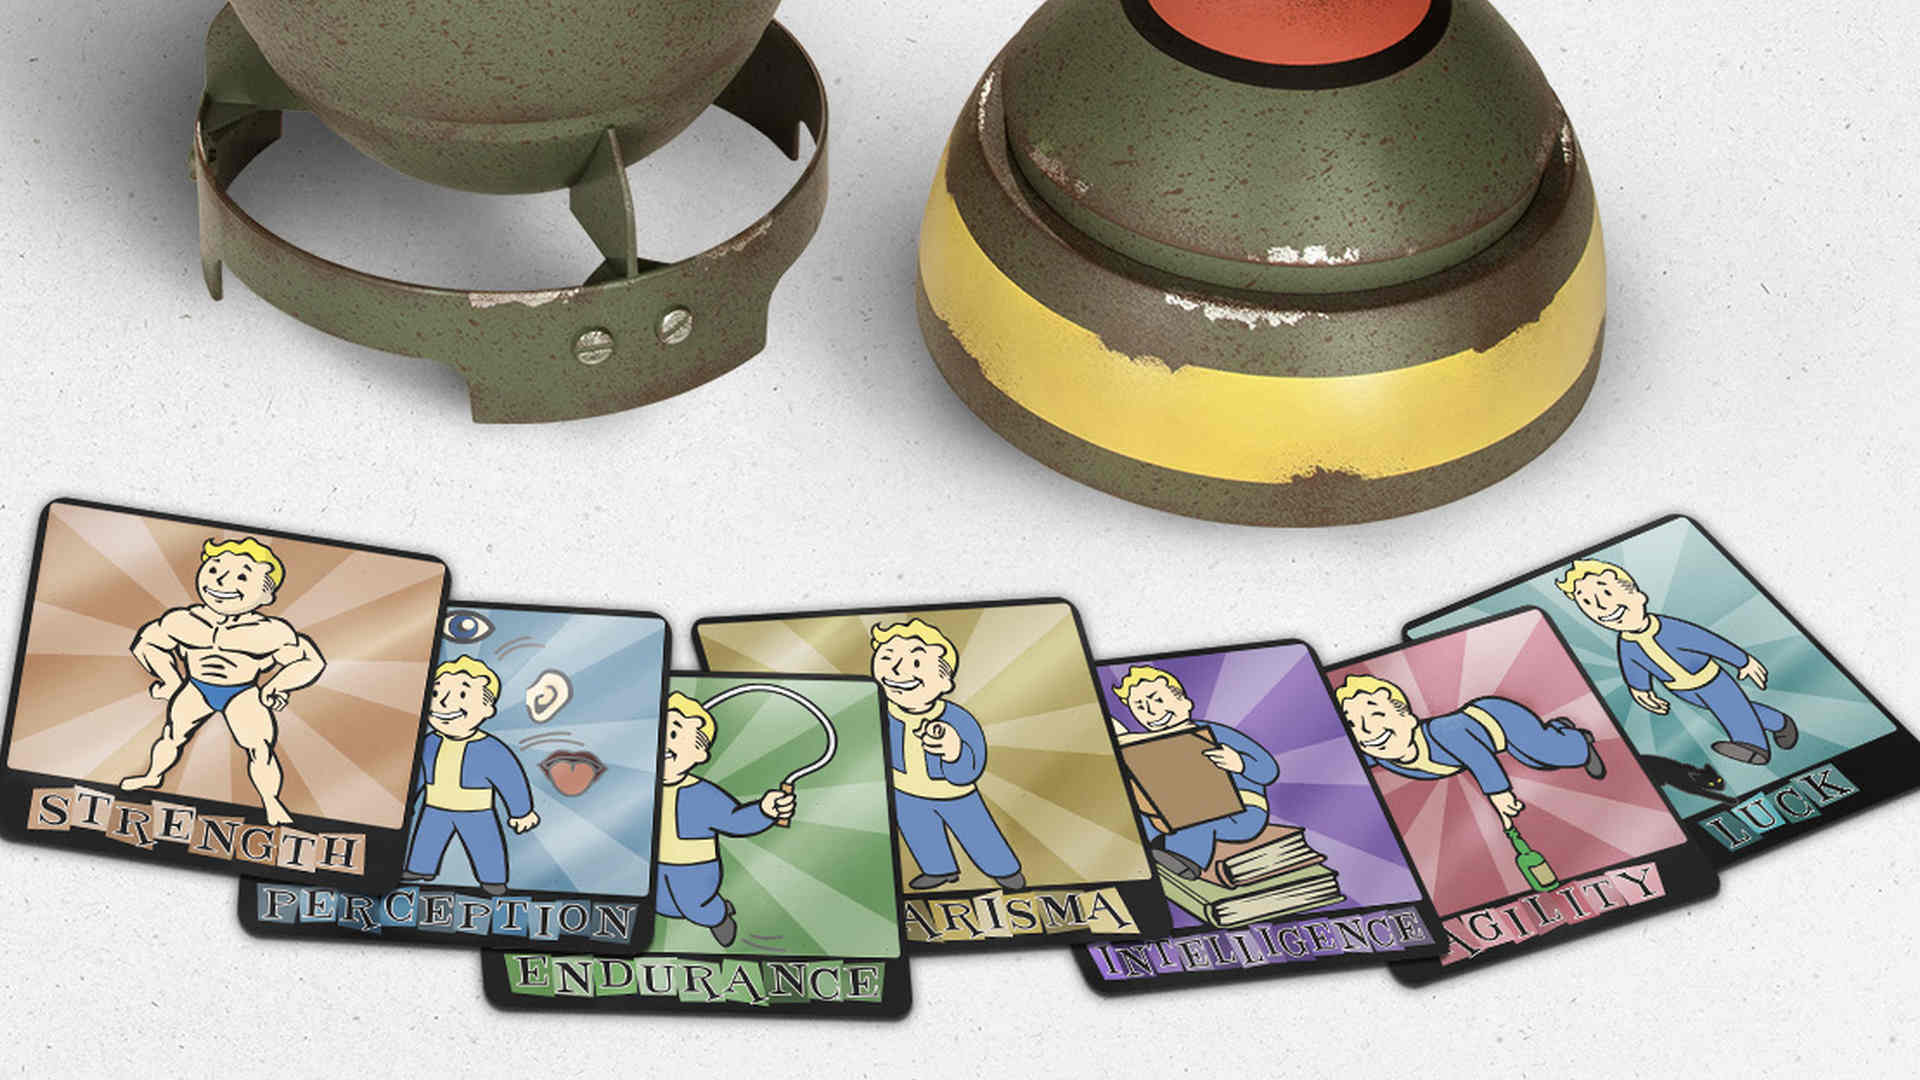 A collection of every major Fallout game spanning 27 years of the